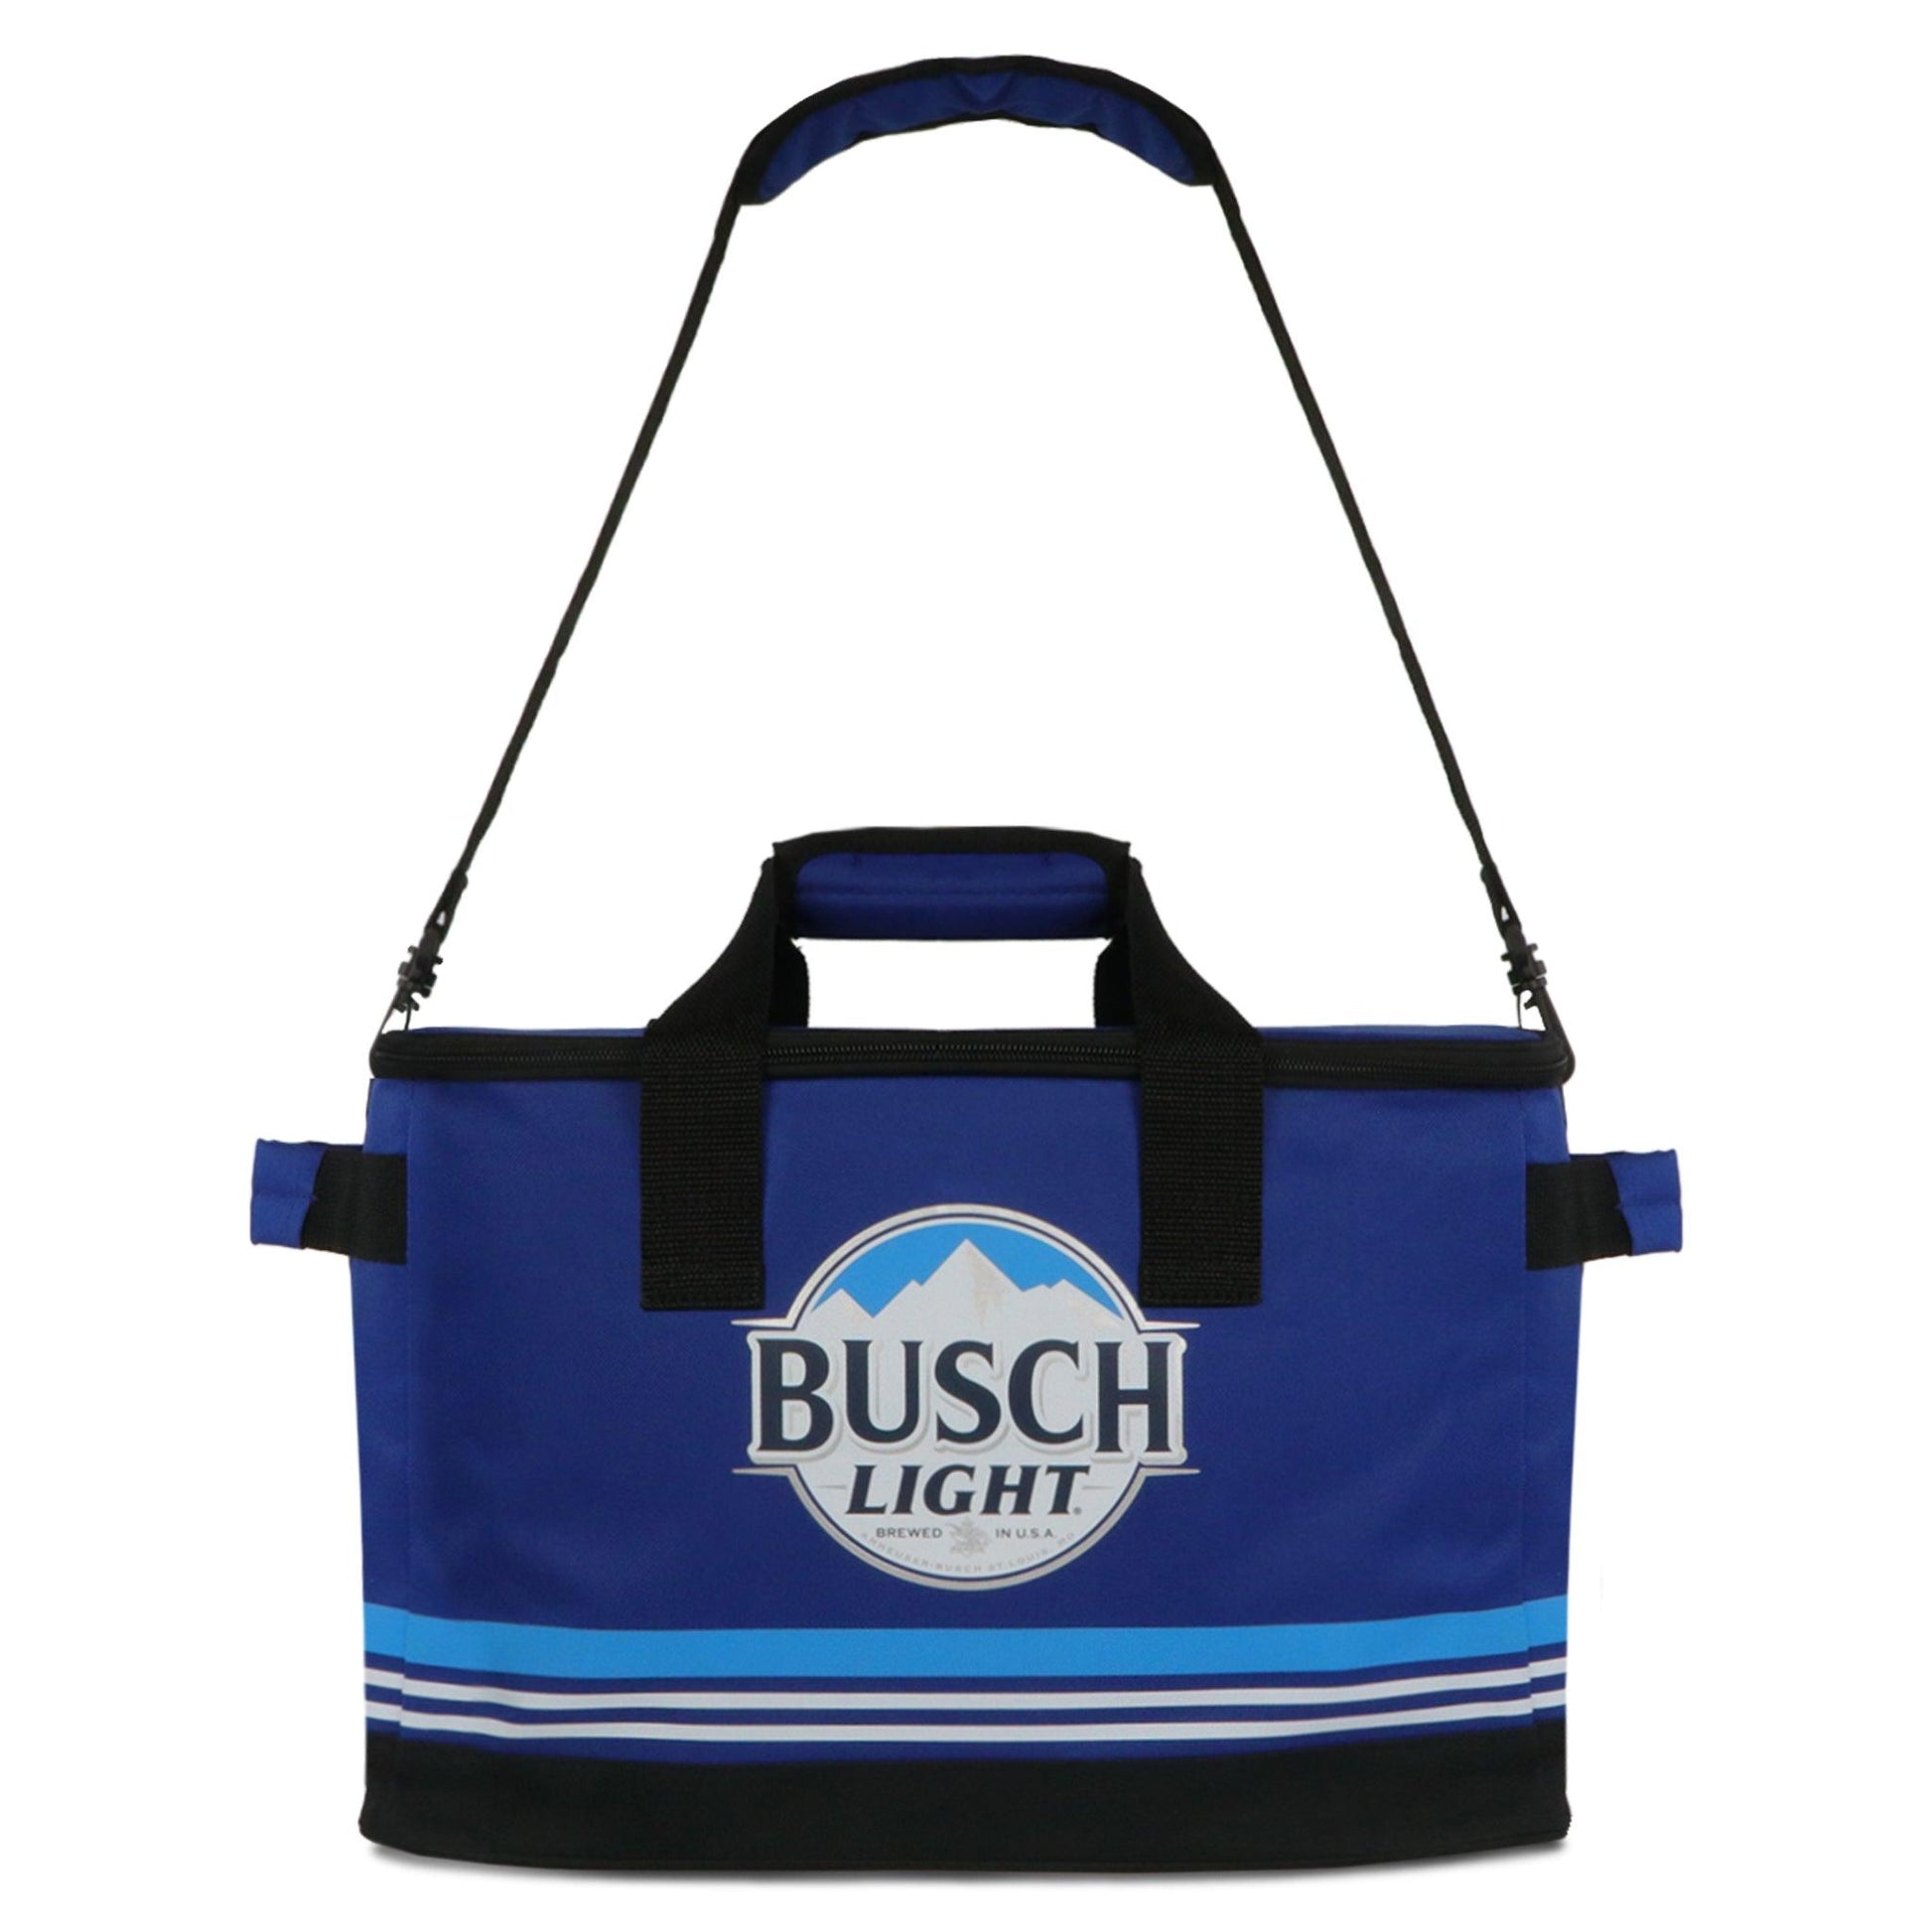 Busch Light Soft Cooler with Busch Light circle logo. Two handles on the sides, top carry handle and long carry strap.